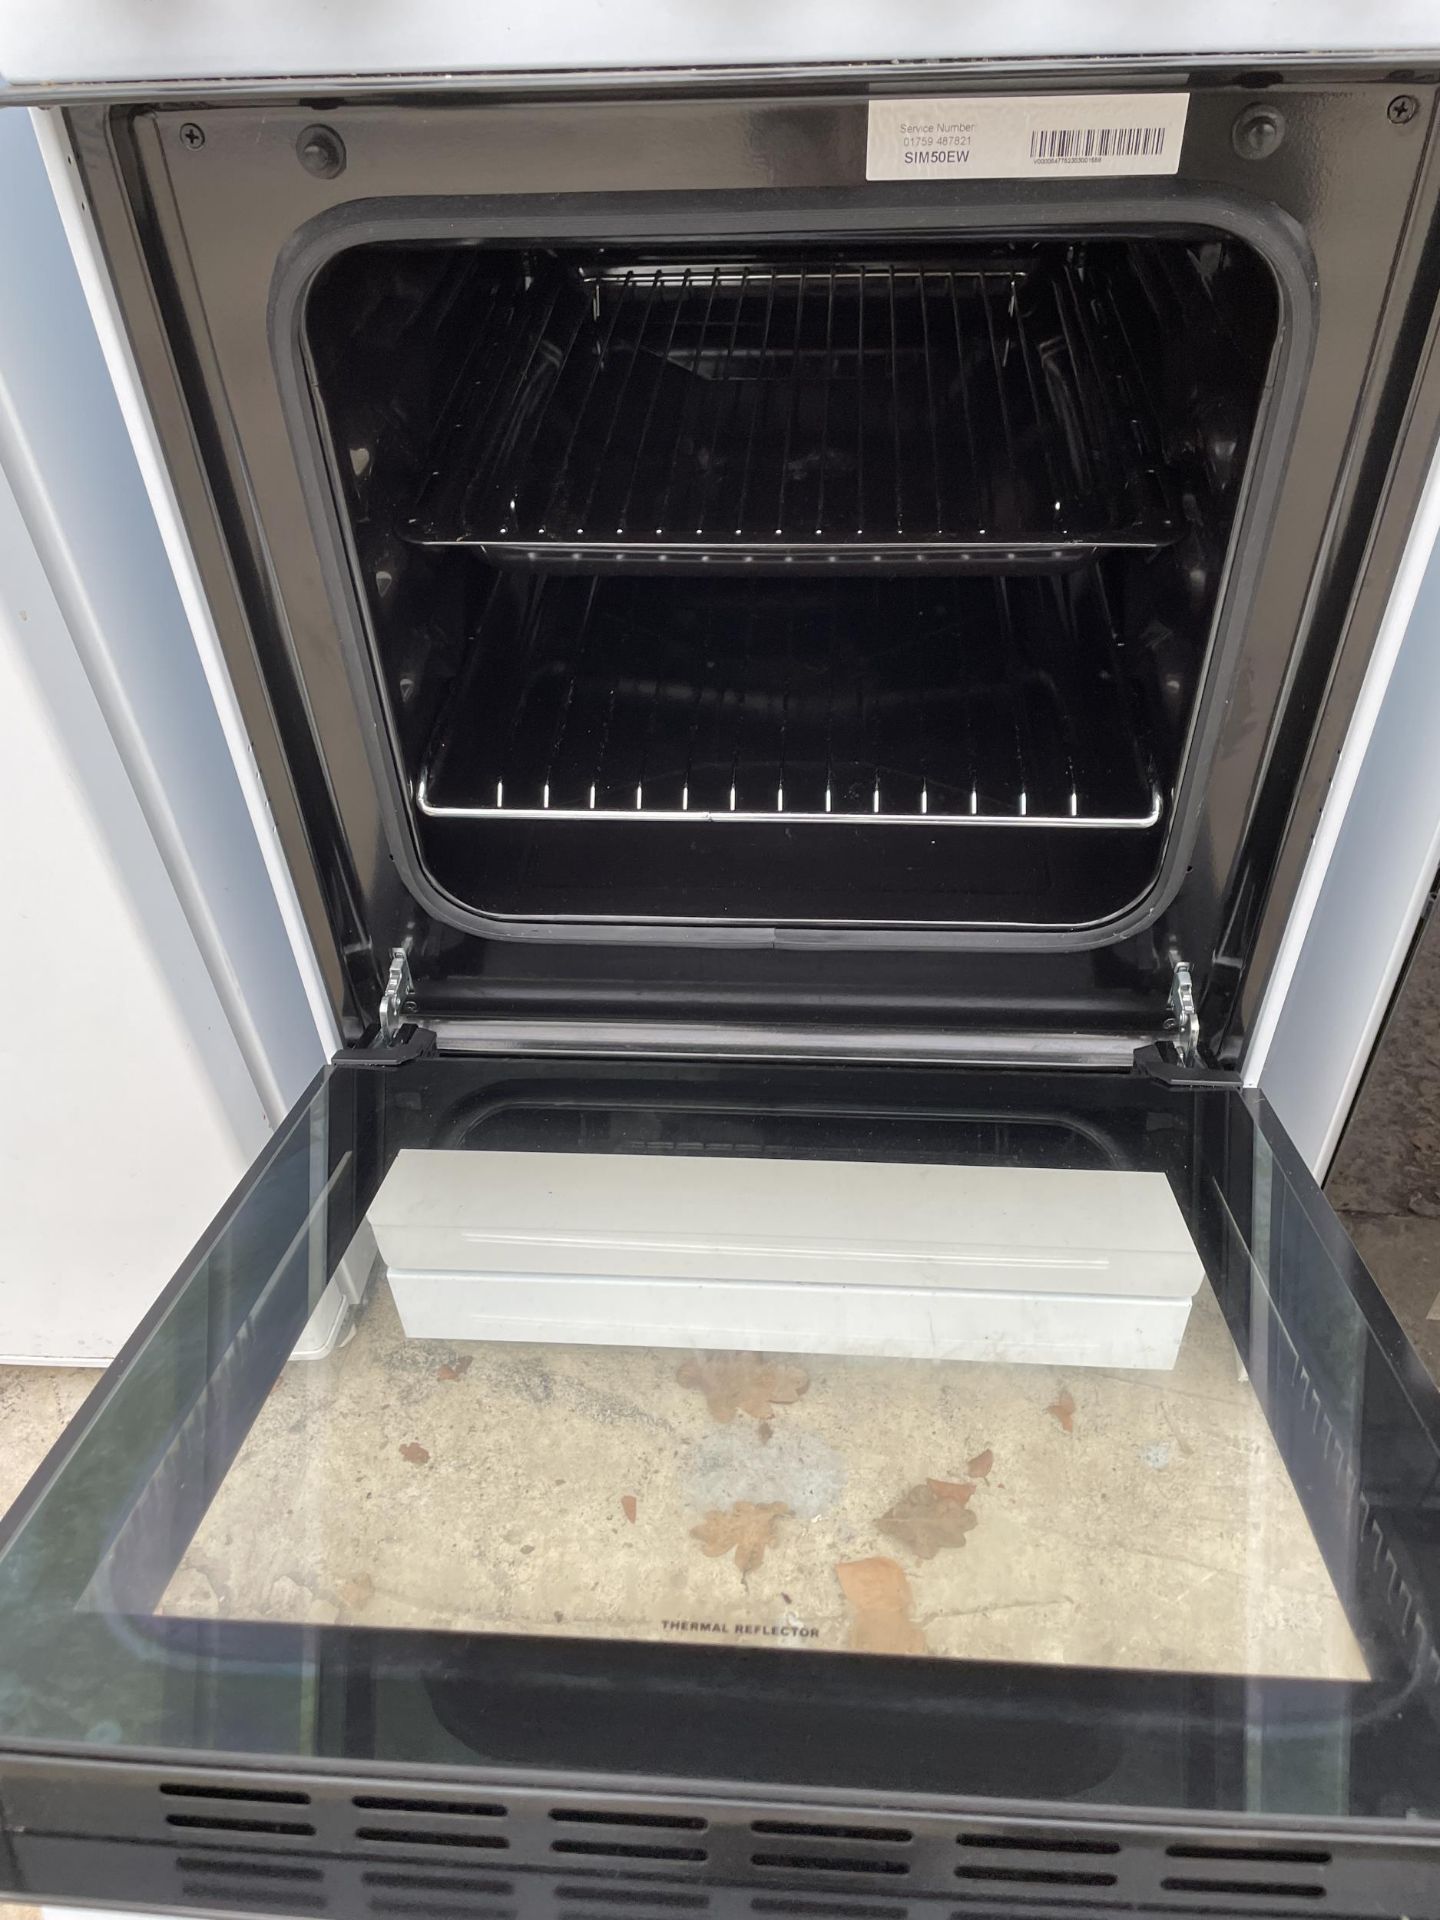 A WHITE AND BLACK SIMFER ELECTRIC OVEN AND HOB - Image 2 of 3